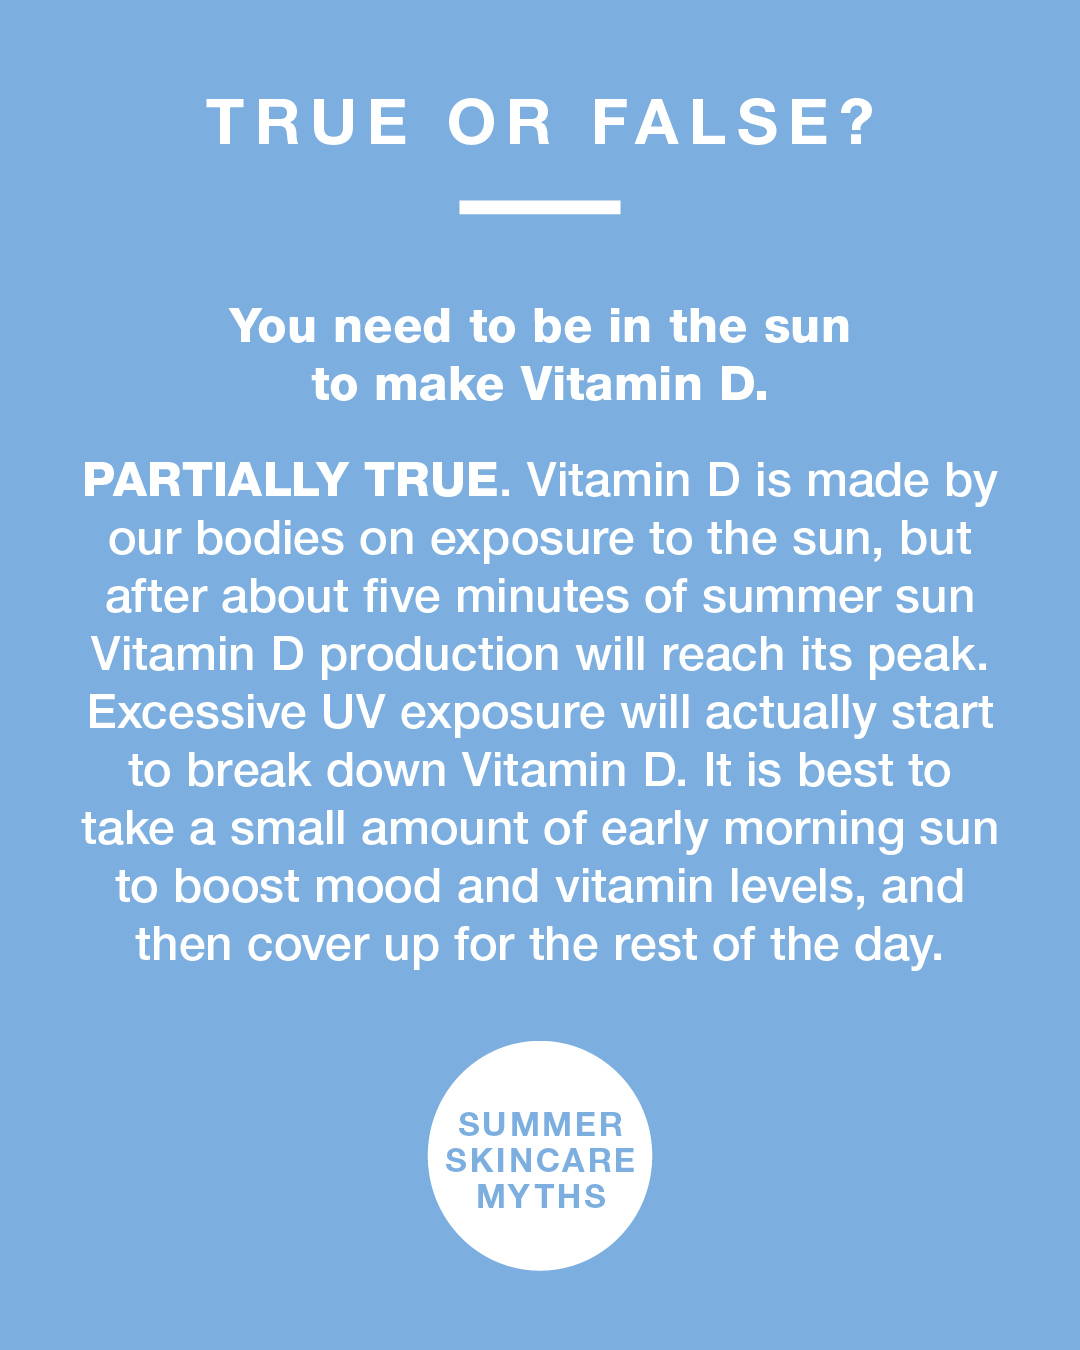 Summer skincare facts true or false. You need to be in the sun to make Vit D. Partially true. 